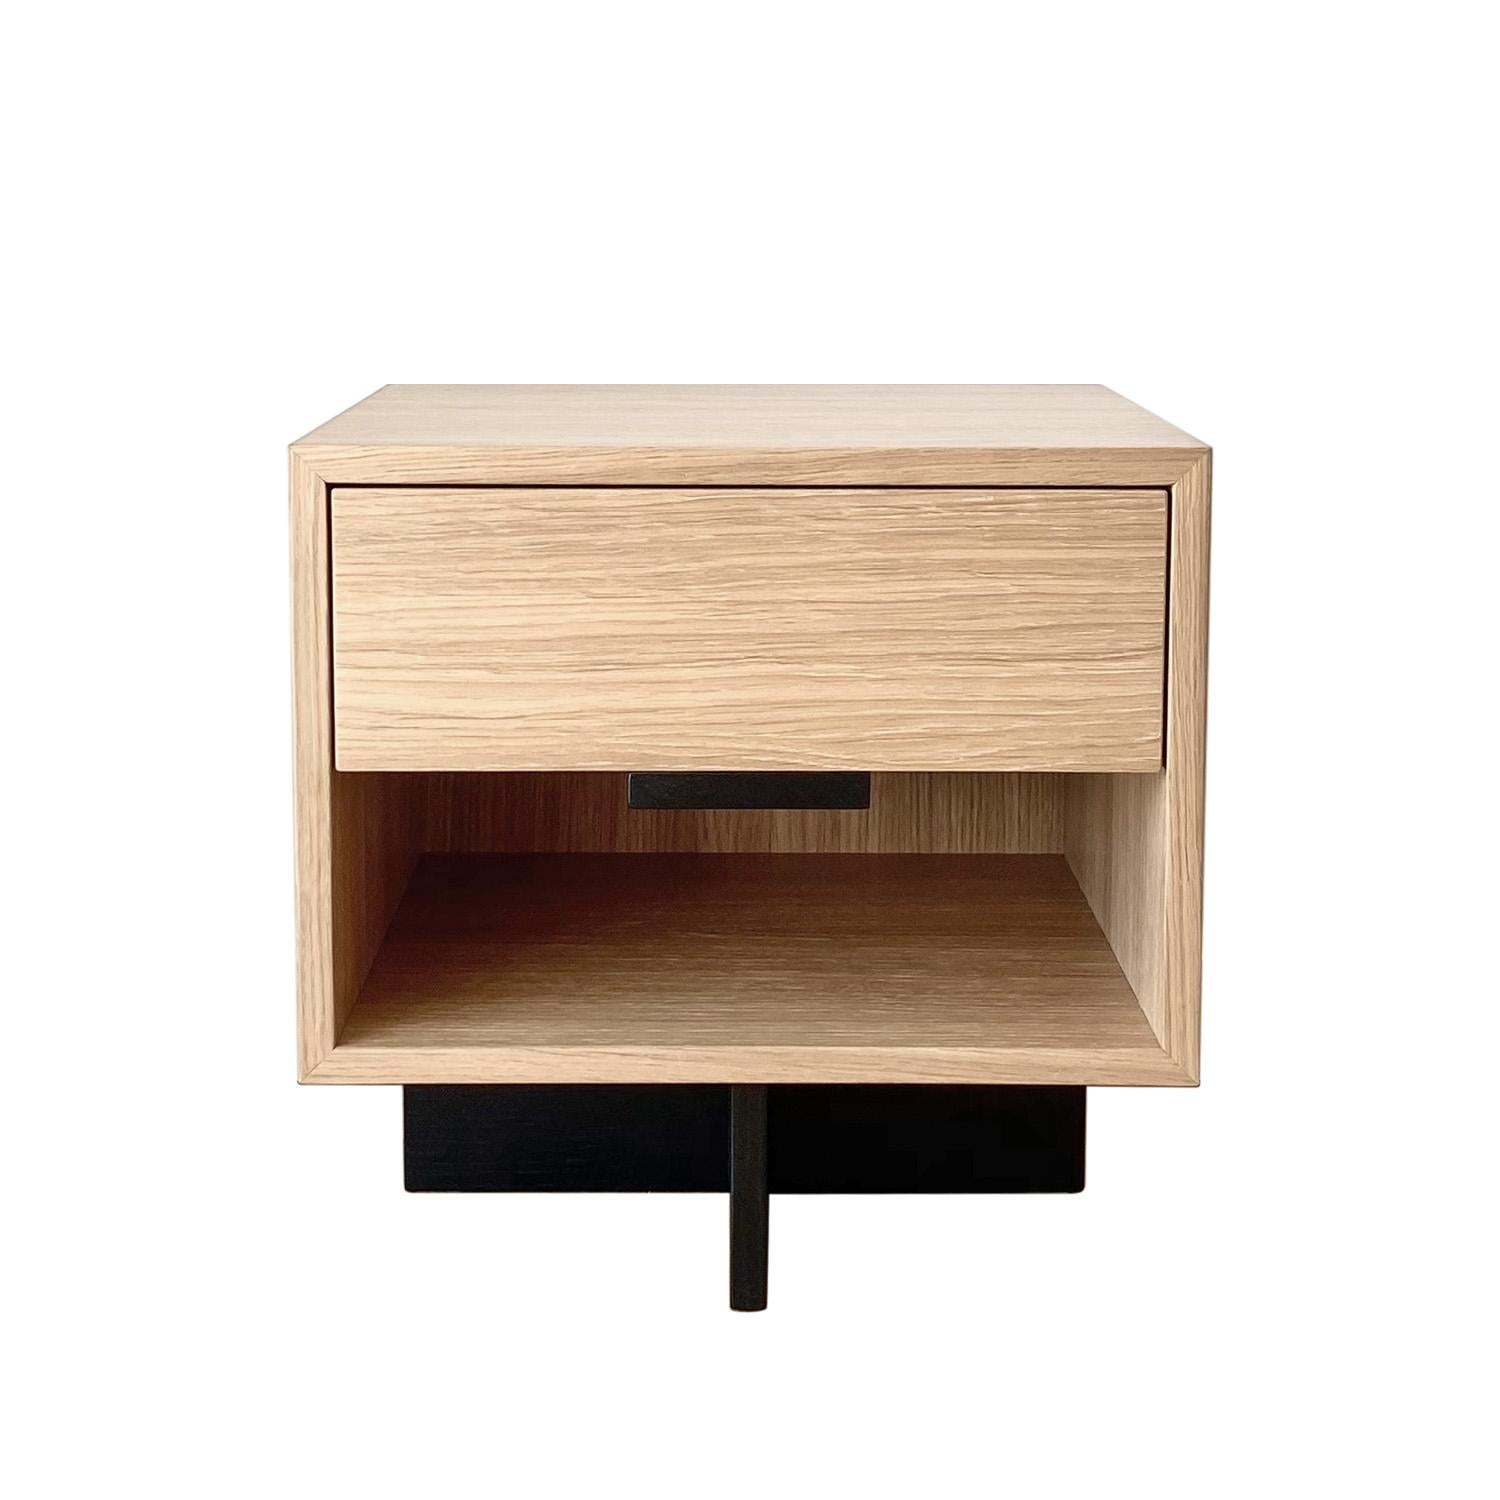 Kaid nightstand is a functional and eye-catching furniture piece that is sure to add a modern and unique touch to your living space.

The contrast between the massive, rectangular storage component and the thin, linear pedestal results in a light